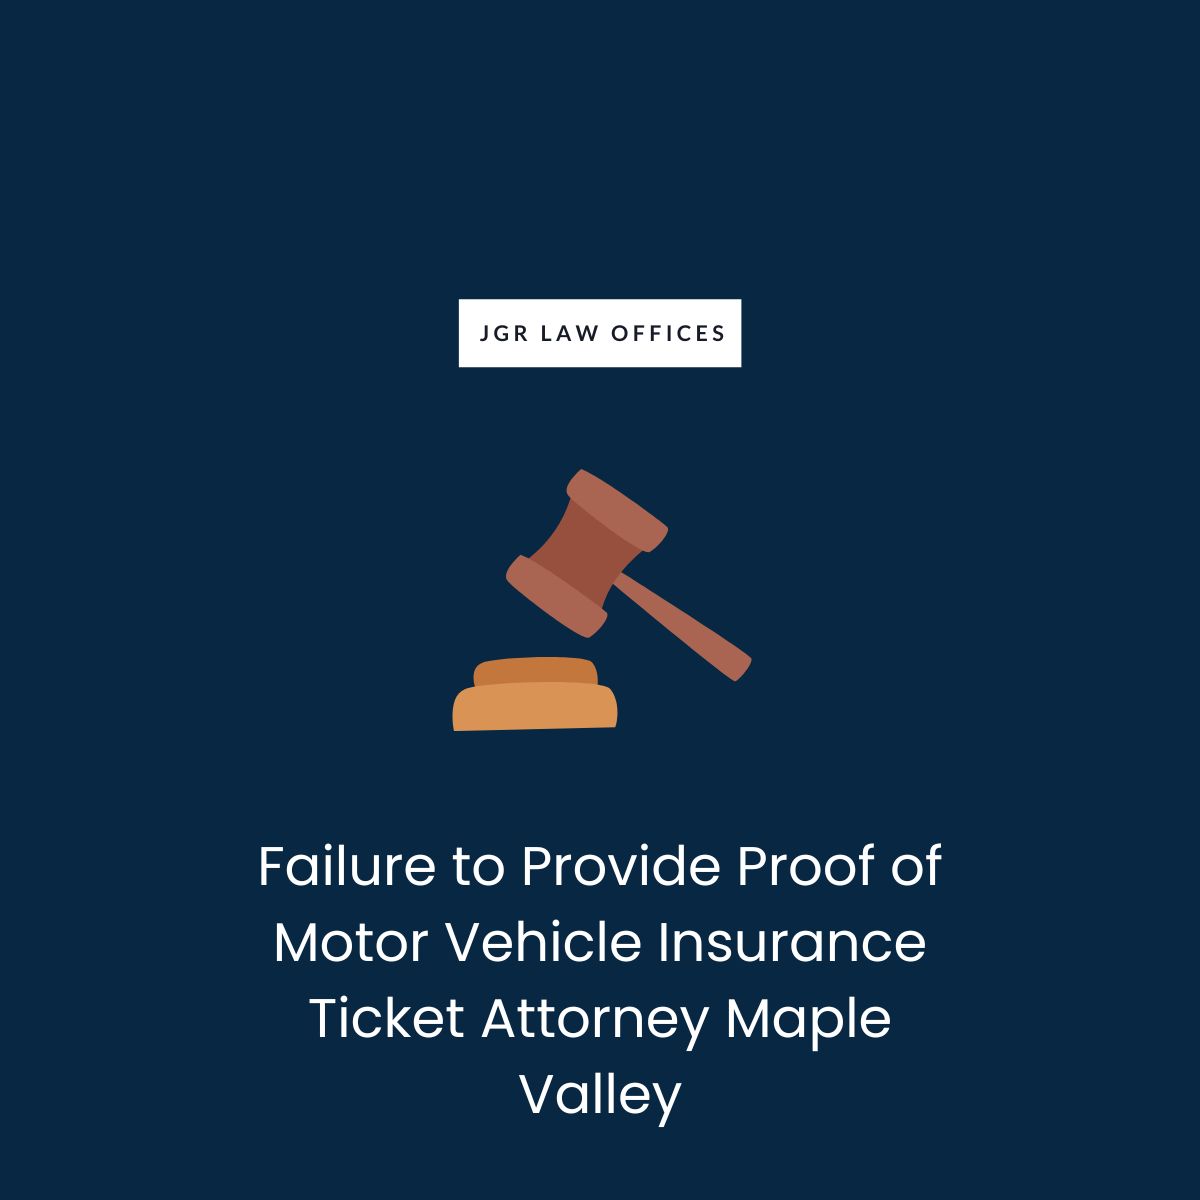 Failure to Provide Proof of Motor Vehicle Insurance Ticket Attorney Maple Valley